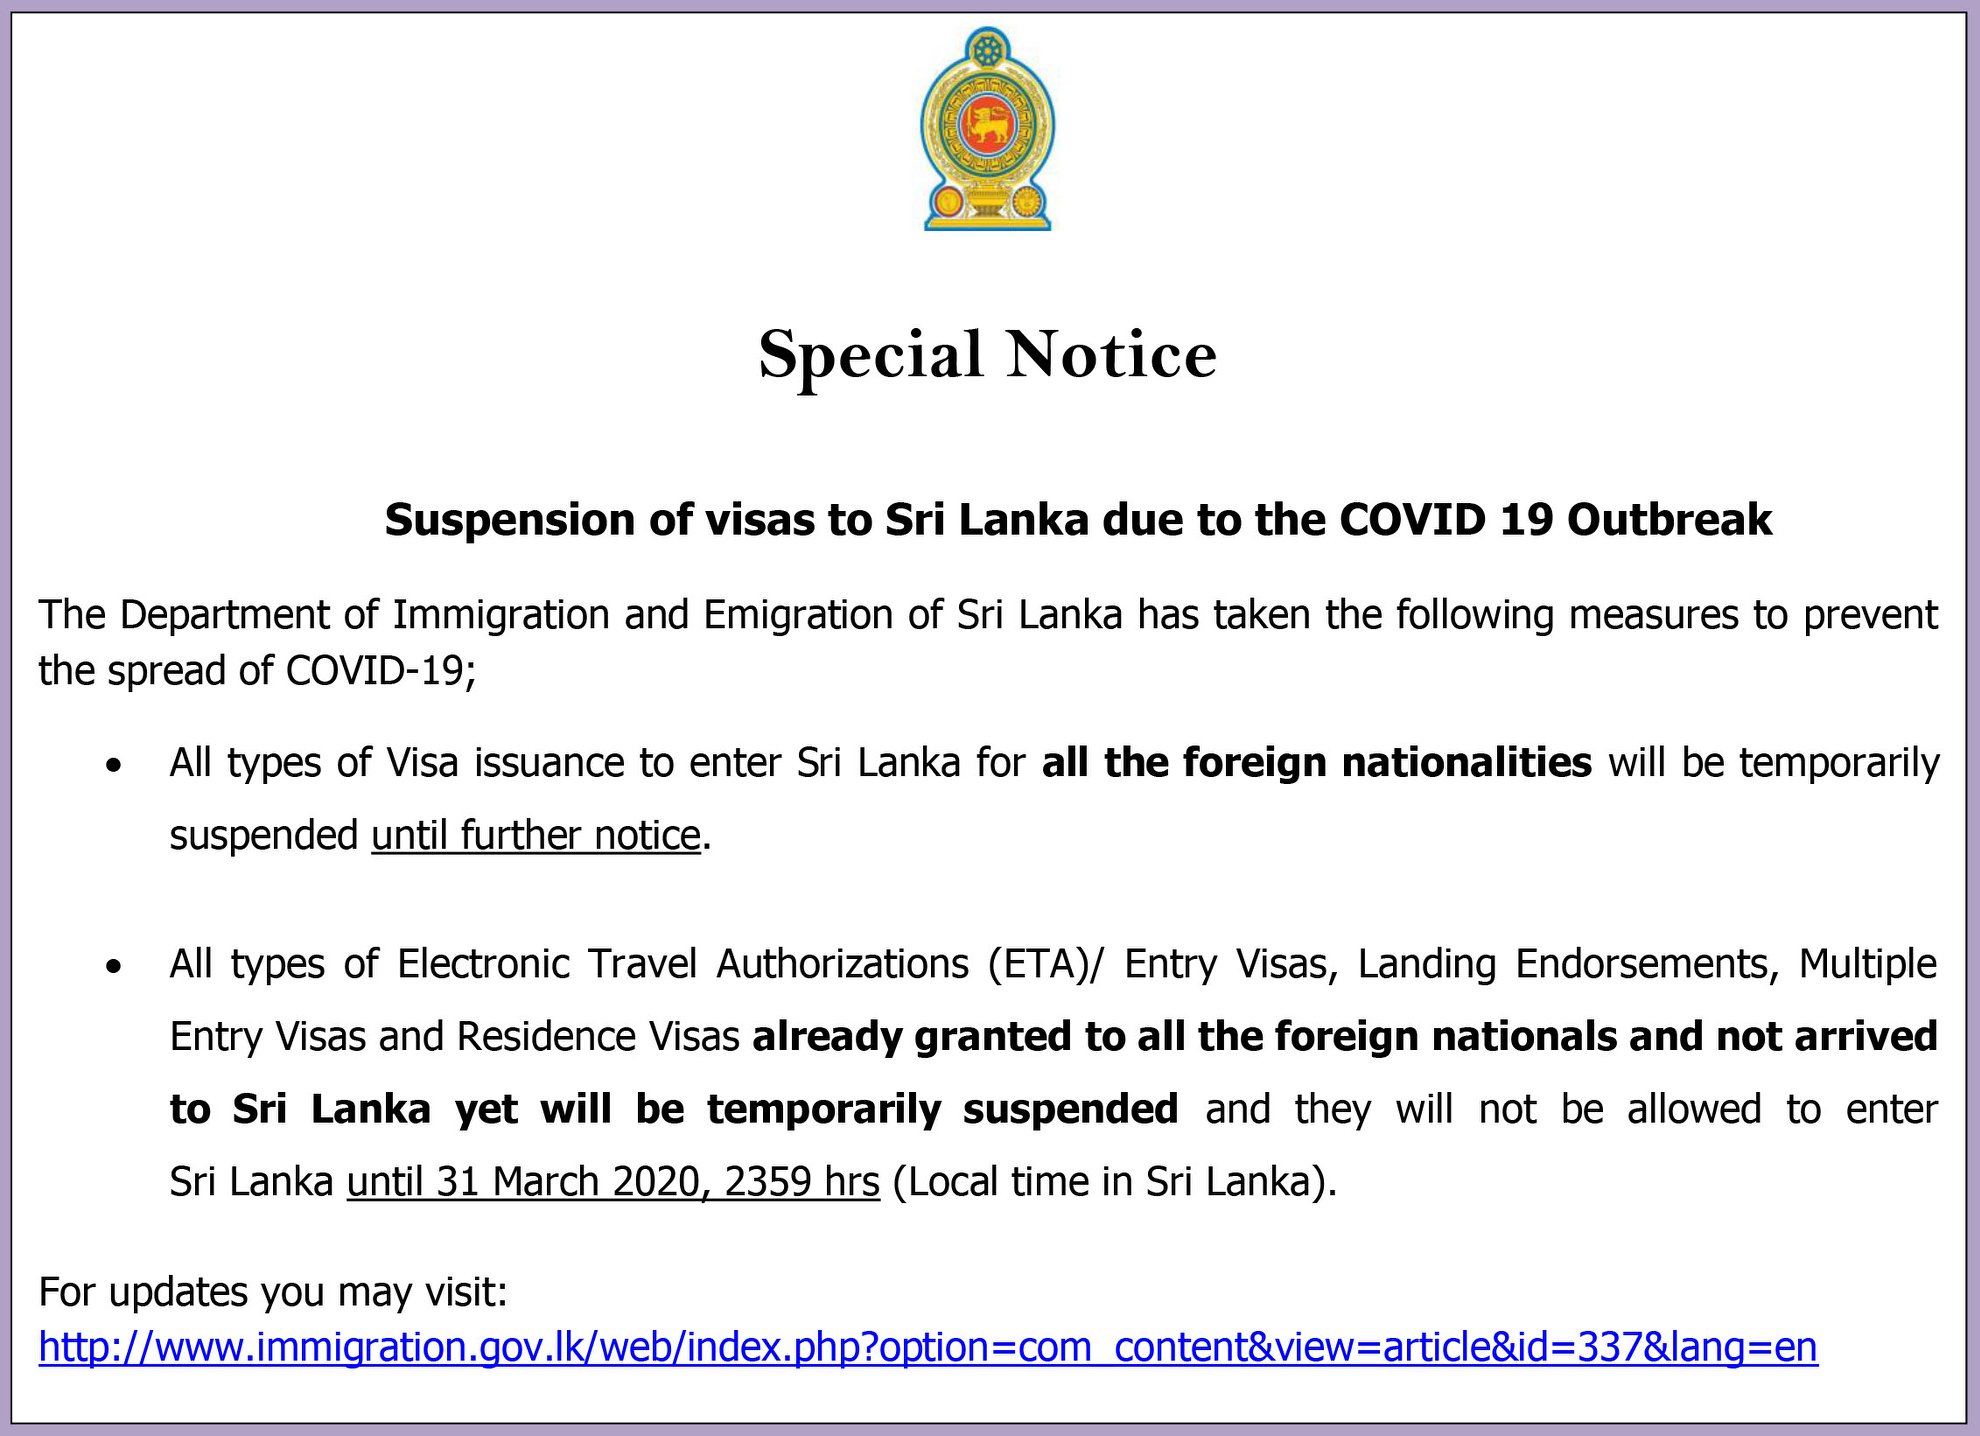 Suspension of visas to Sri Lanka due to the COVID 19 Outbreak